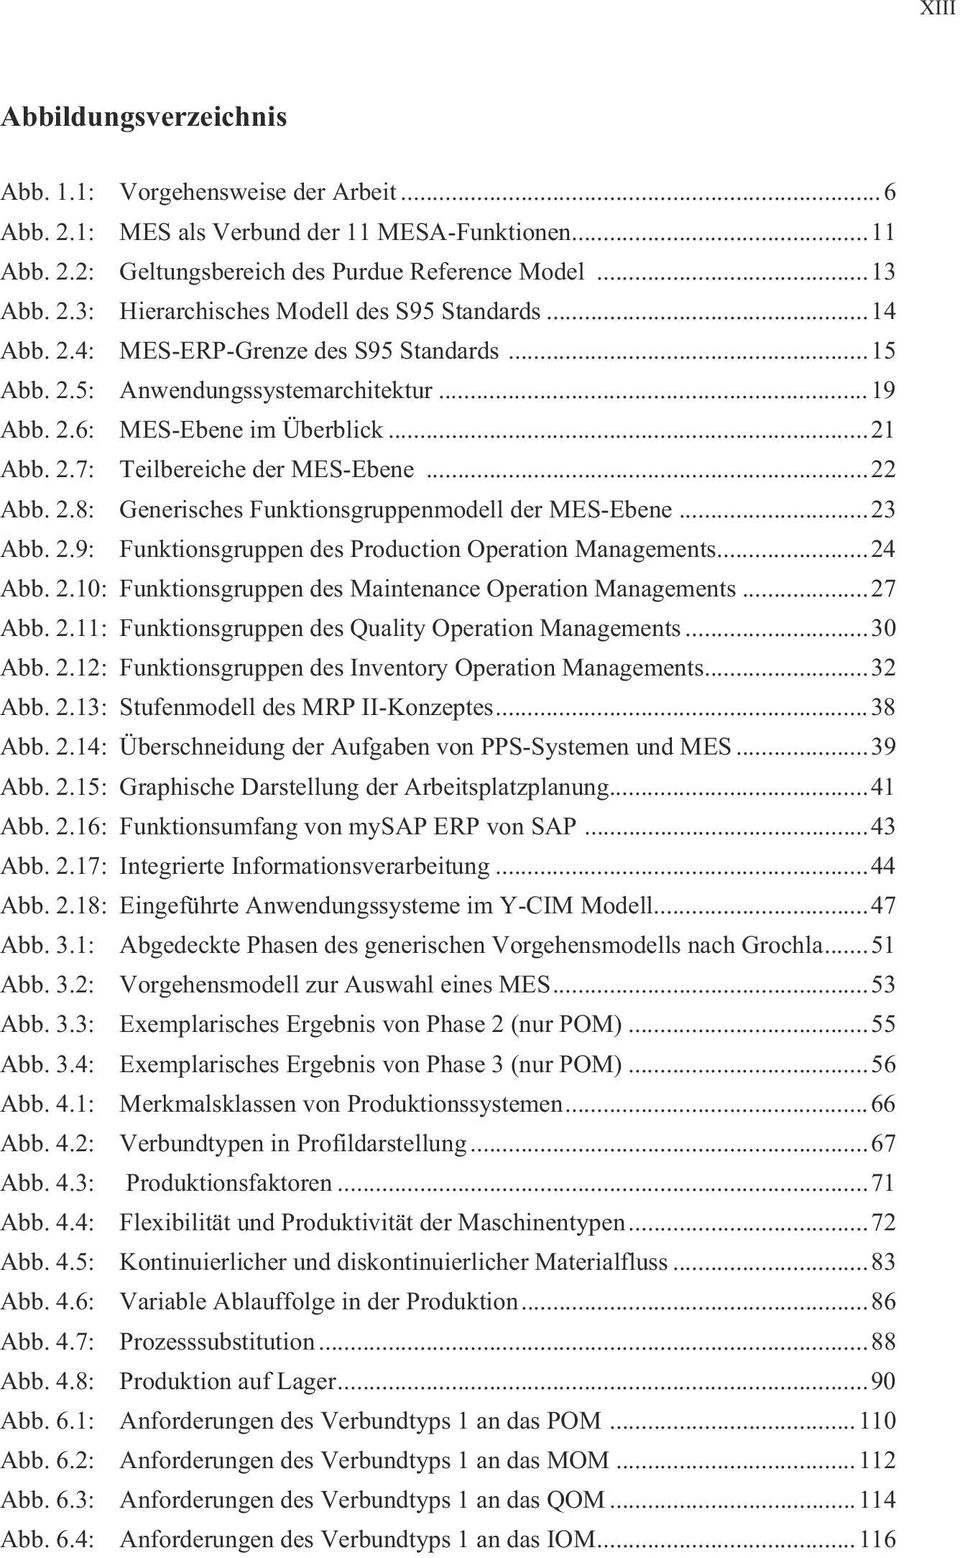 ..23 Abb. 2.9: Funktionsgruppen des Production Operation Managements...24 Abb. 2.10: Funktionsgruppen des Maintenance Operation Managements...27 Abb. 2.11: Funktionsgruppen des Quality Operation Managements.